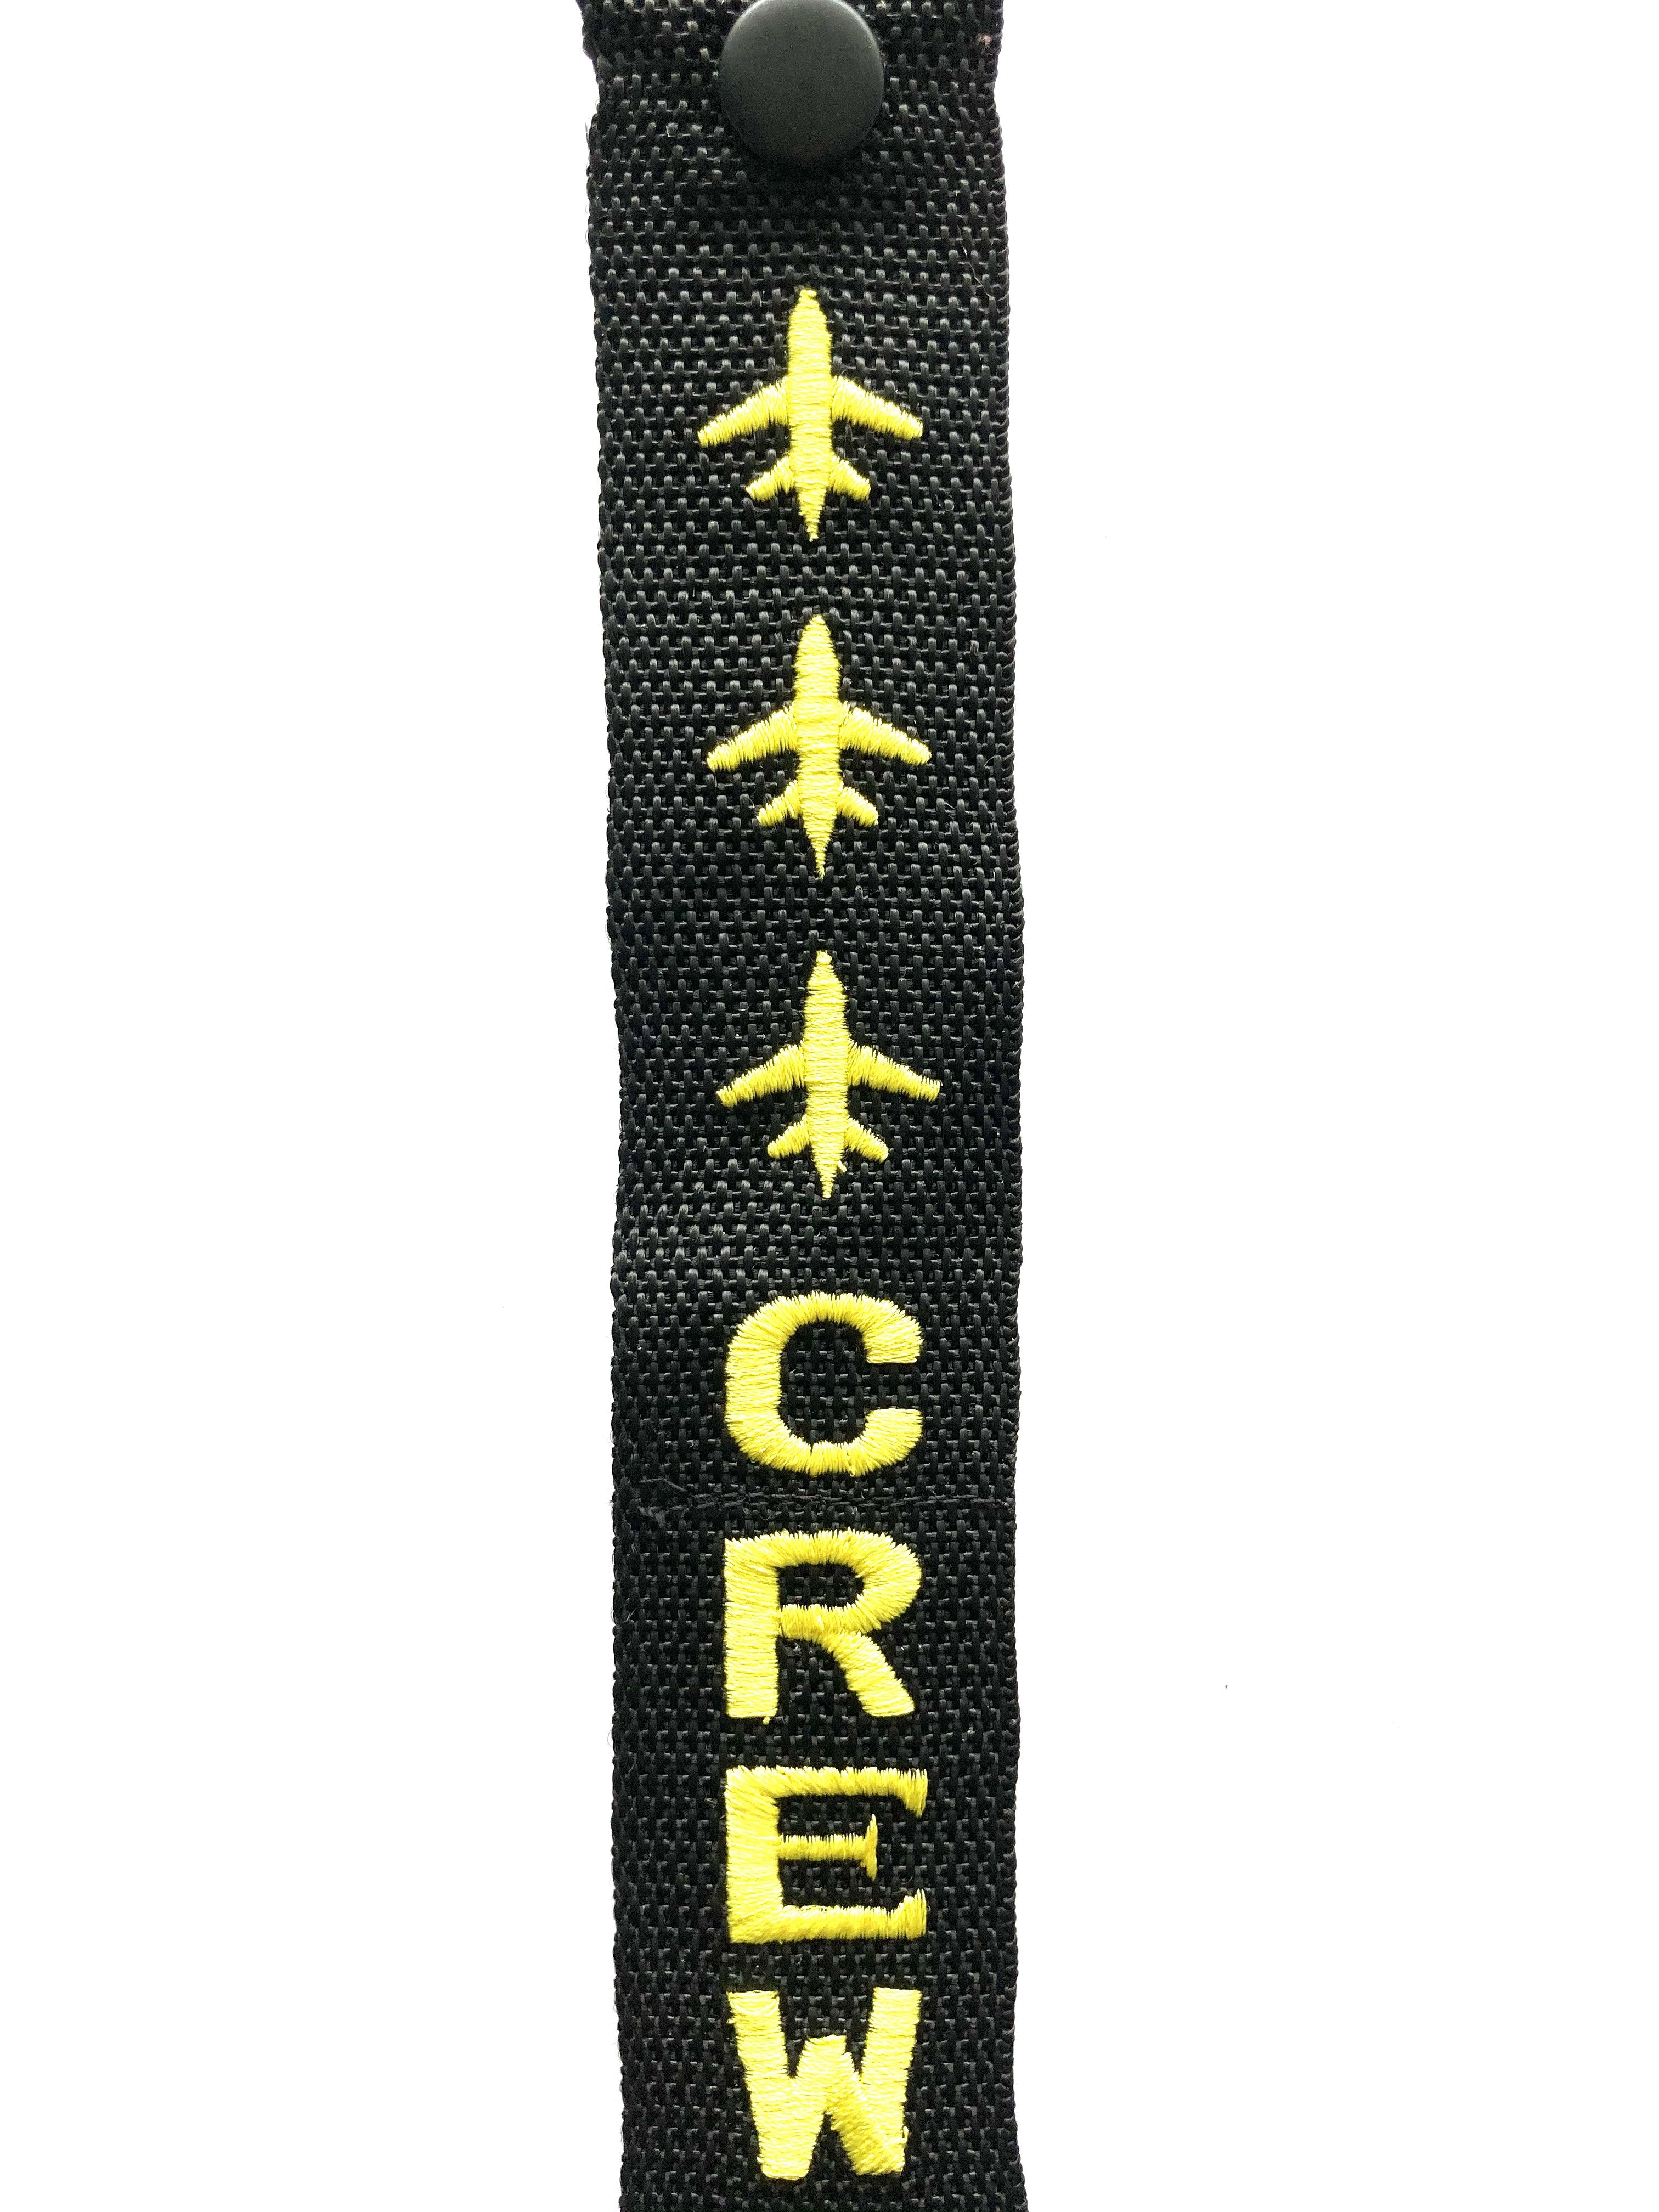 Crew Luggage Tag - YELLOW 3 airplanes